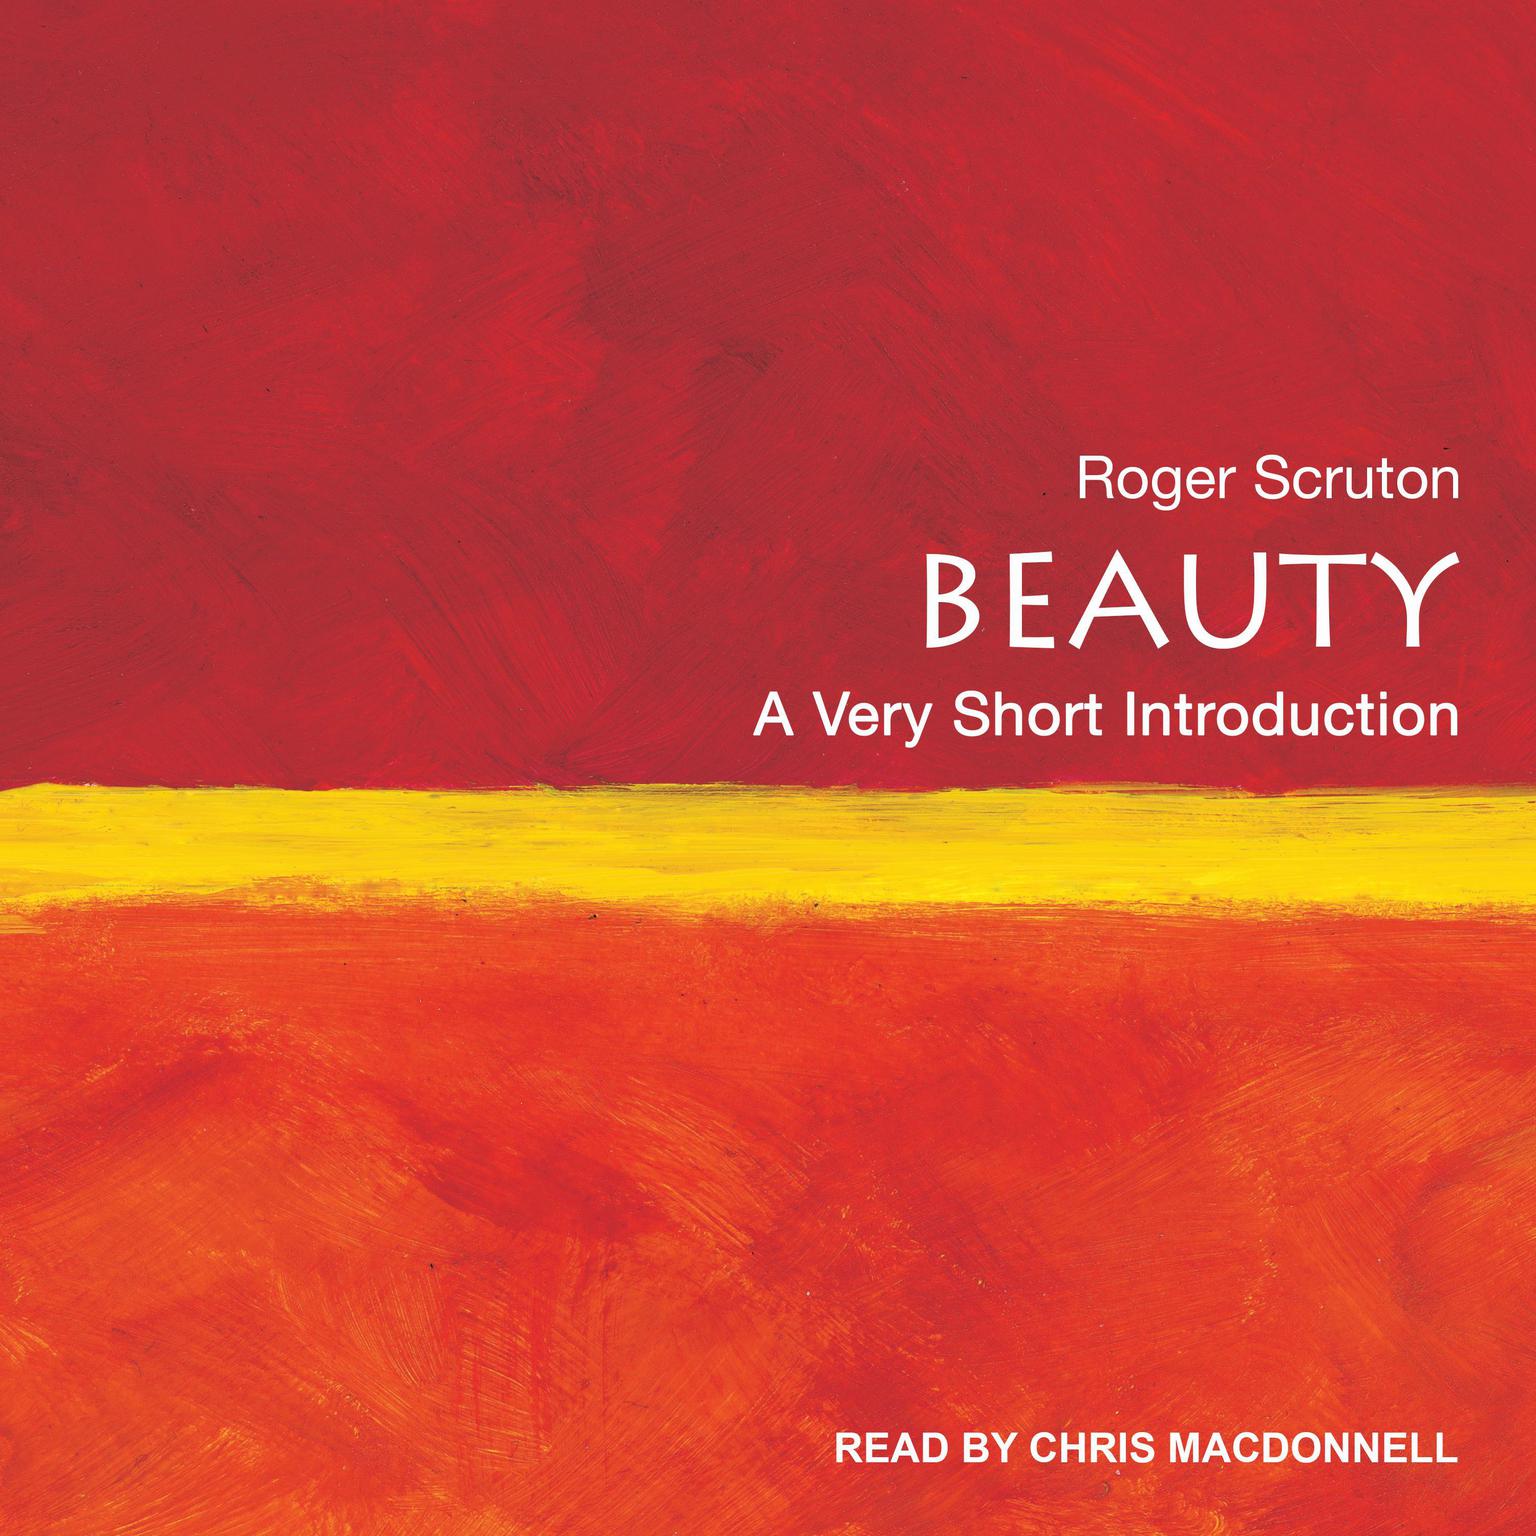 Beauty: A Very Short Introduction Audiobook, by Roger Scruton